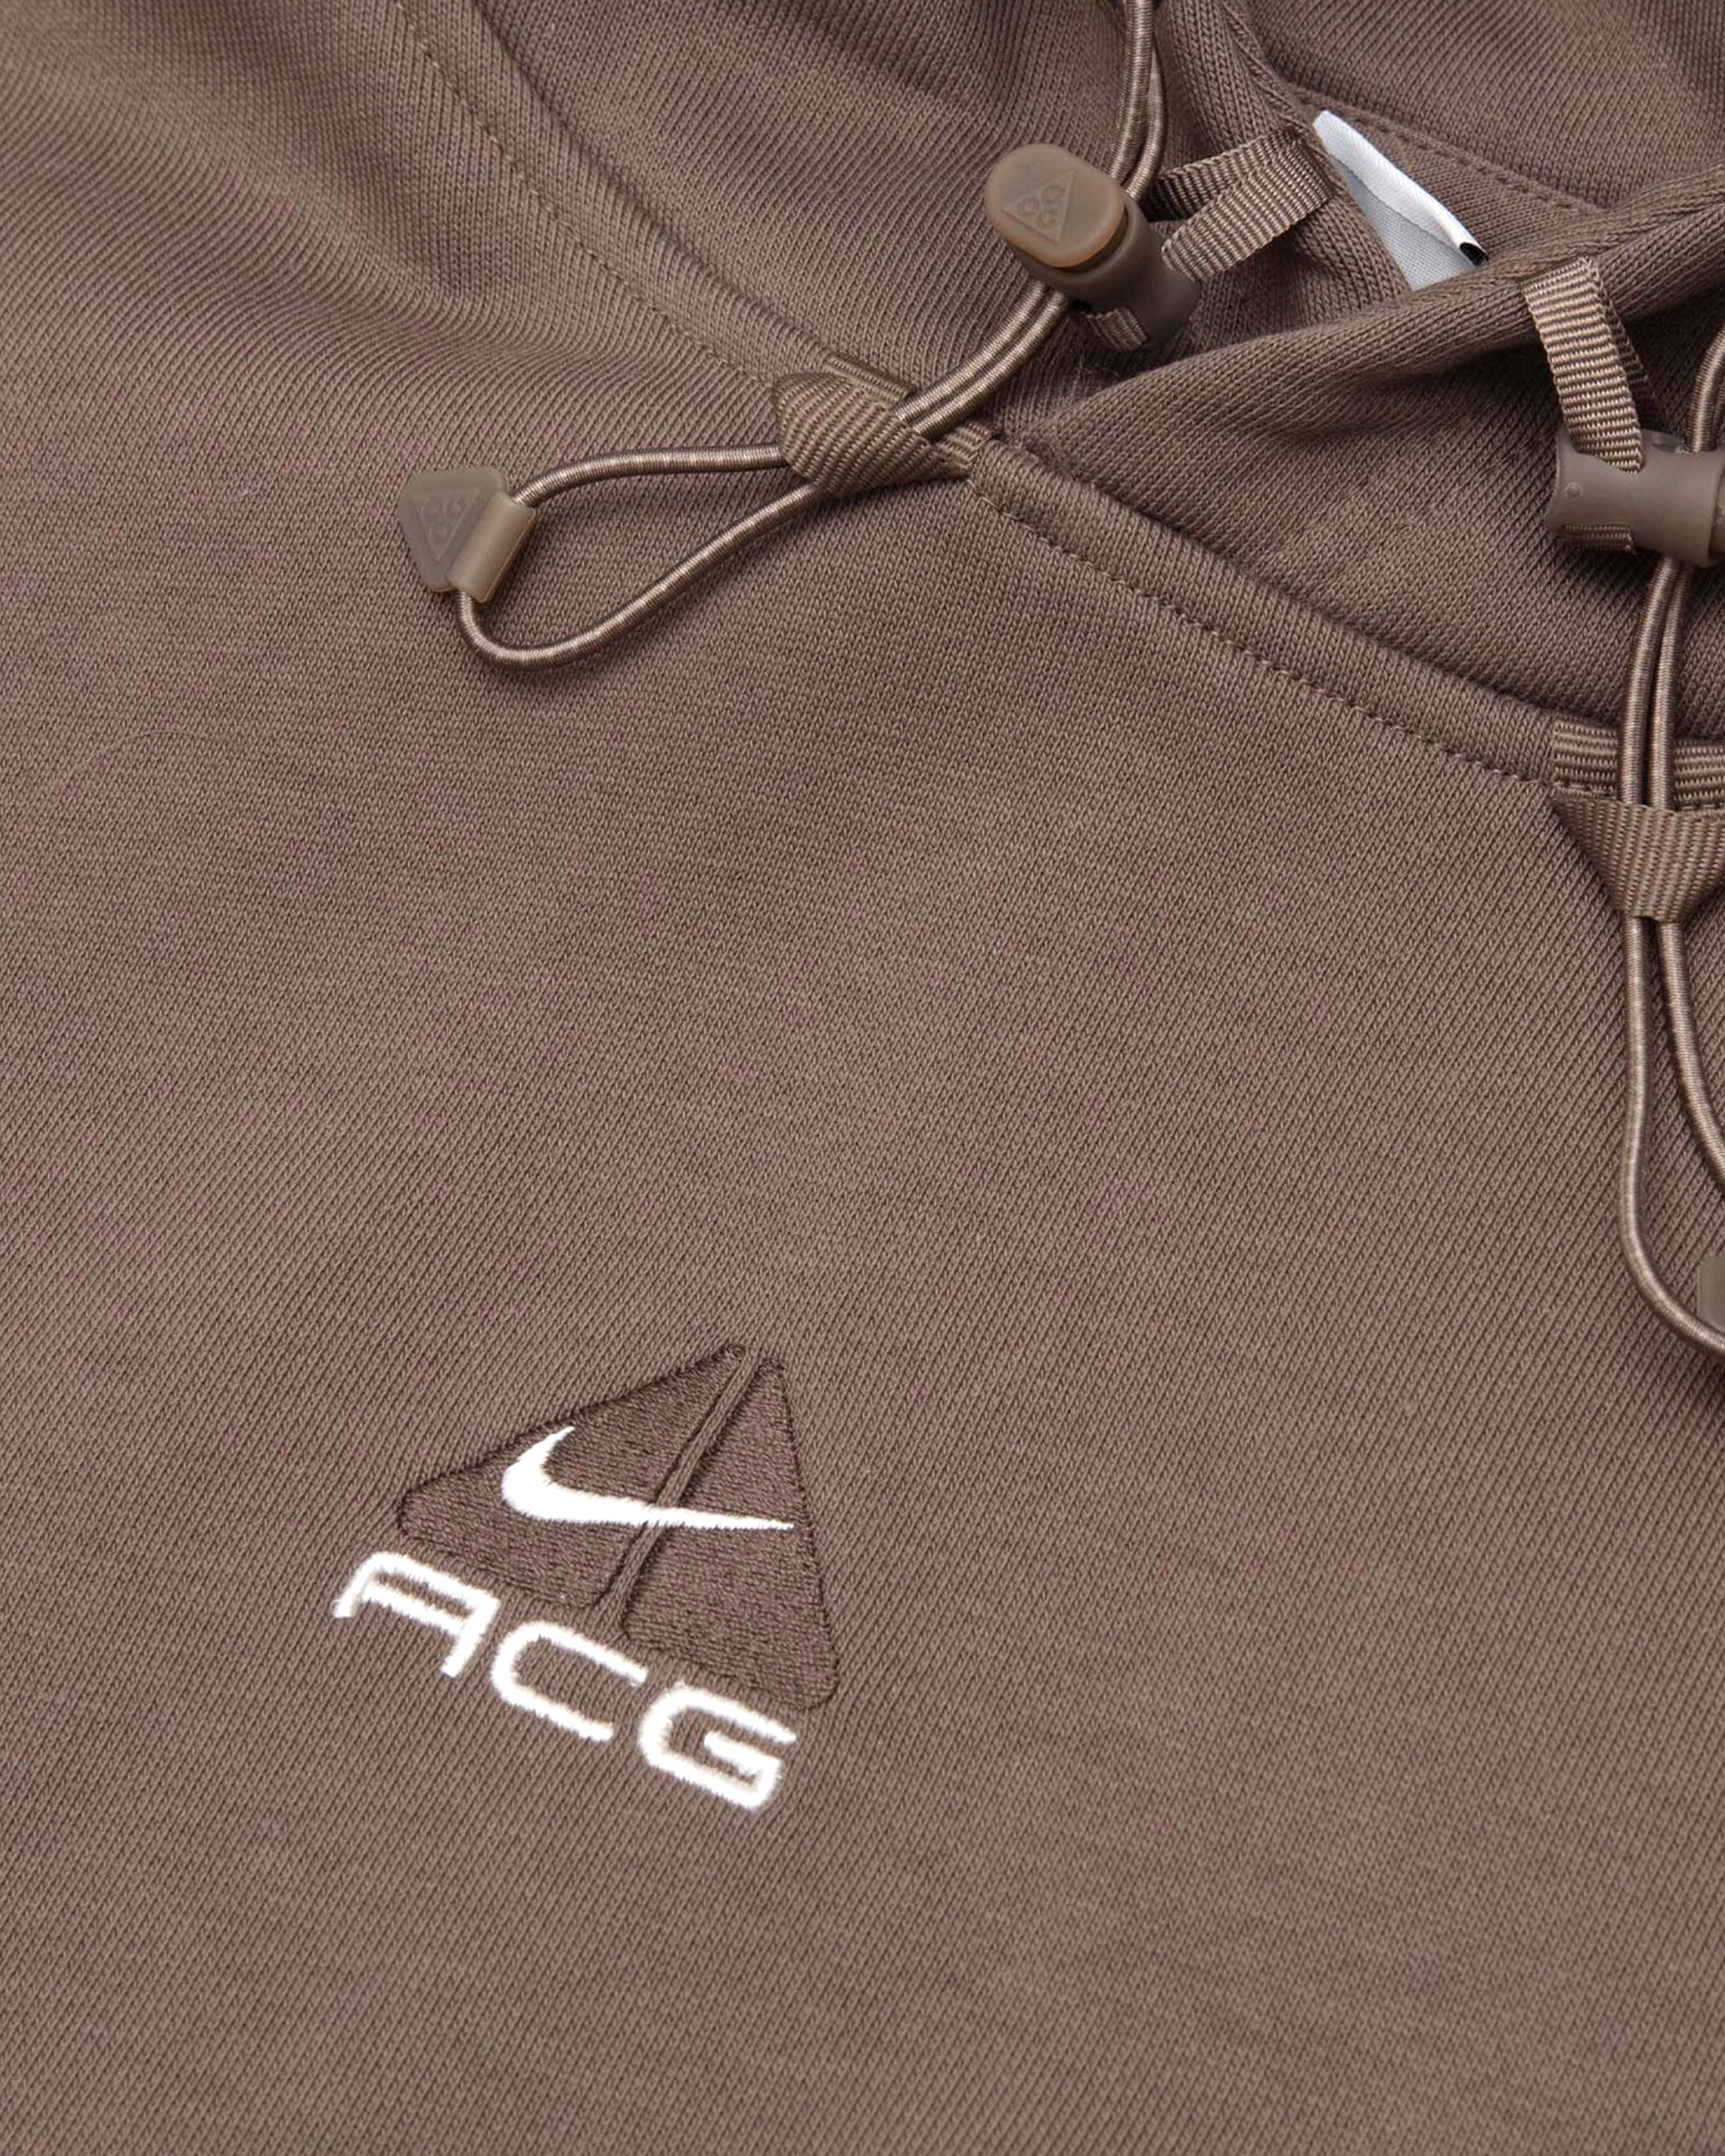 Therma-Fit Fleece Pullover Hoodie - Olive Gray / Ironstone